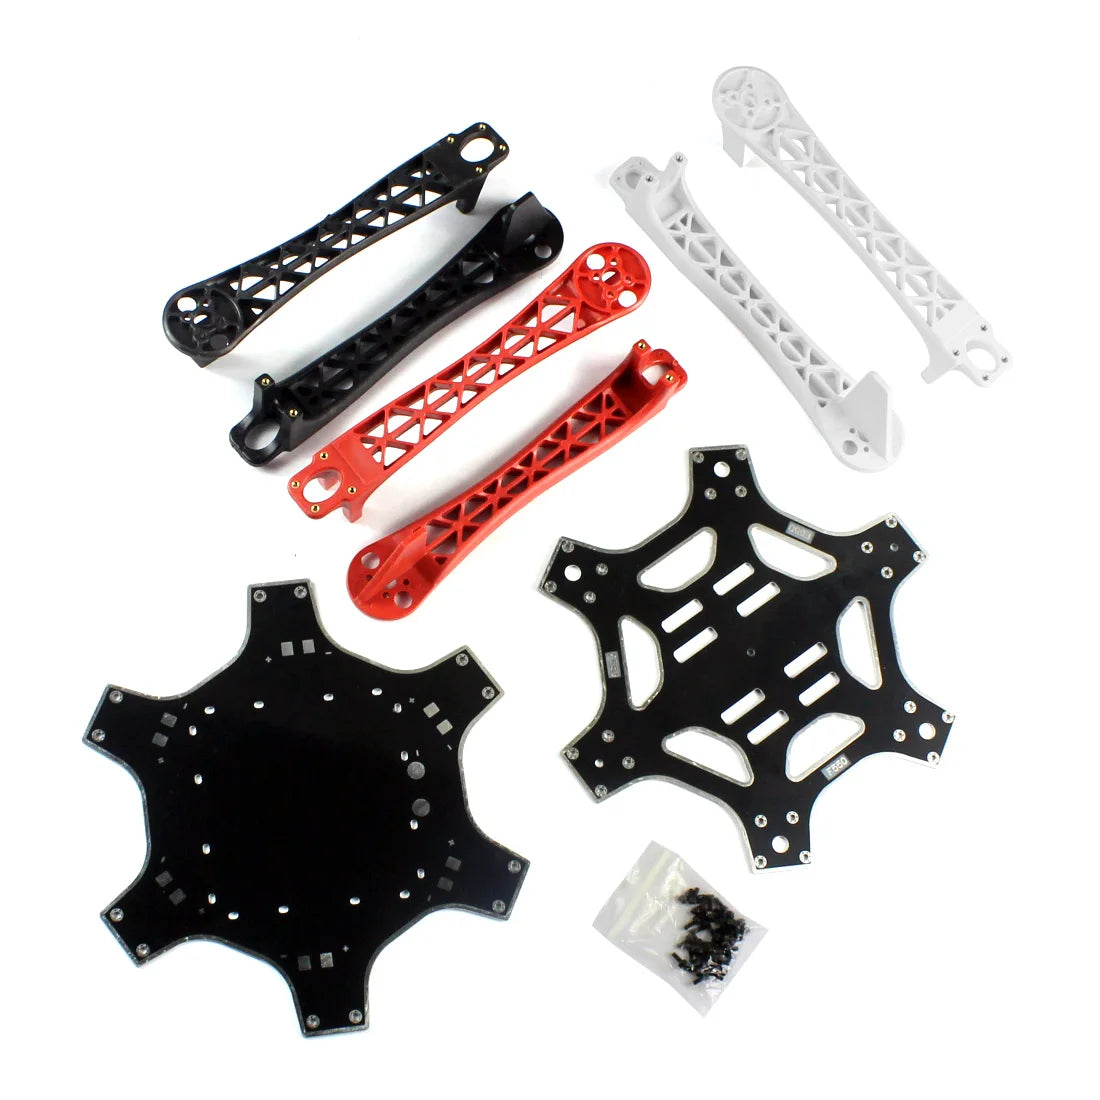 2.4G 8CH F550 RC DIY Quadcopter Unassemble Kit, How to connect the Flight control, GPS, receiver